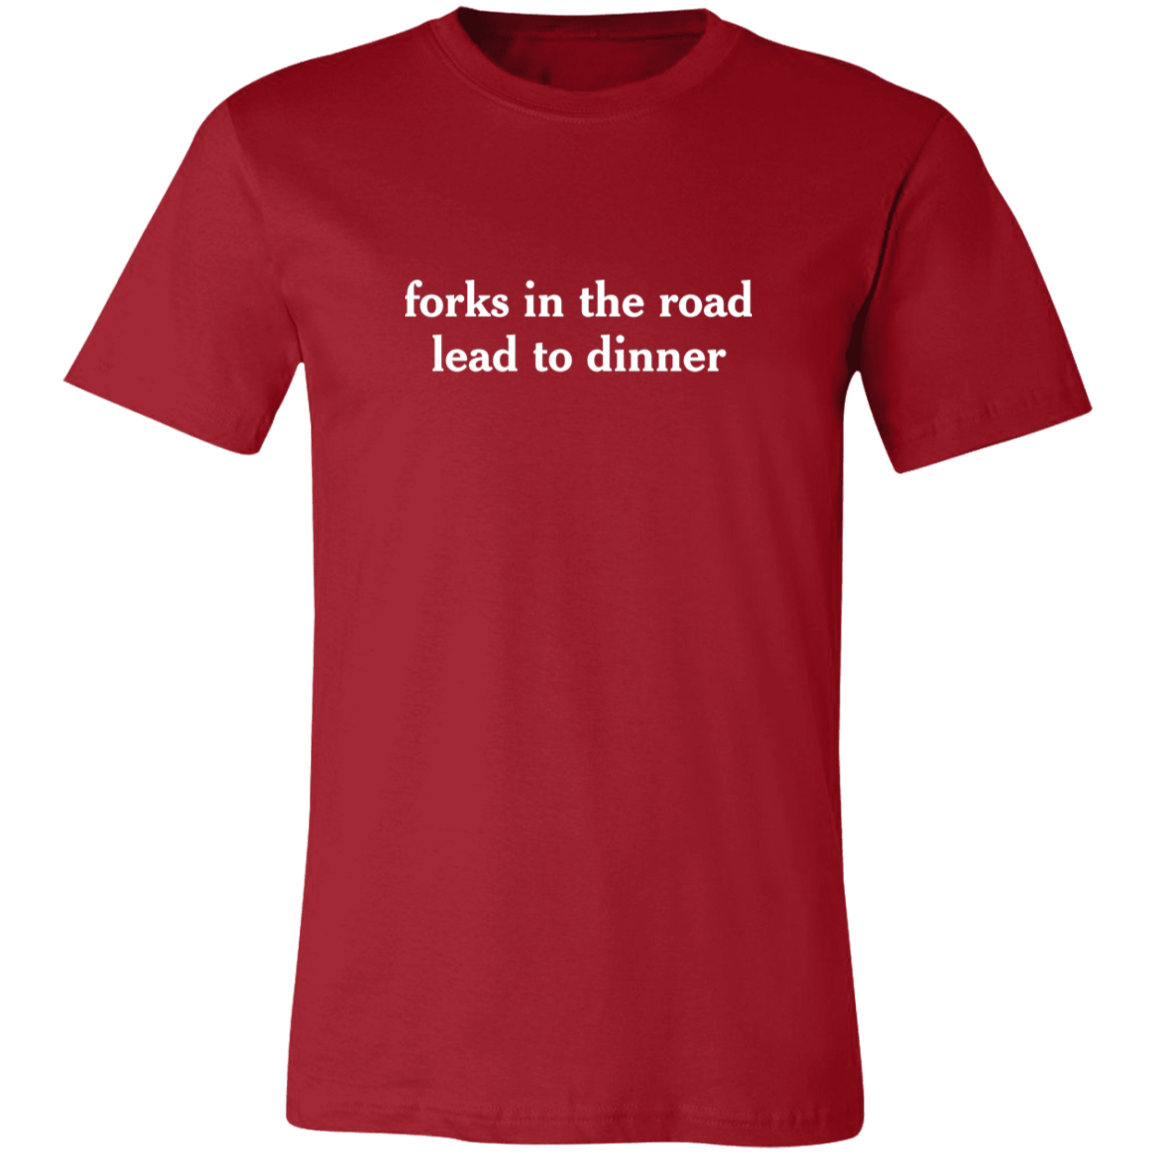 forks in the road lead to dinner tee